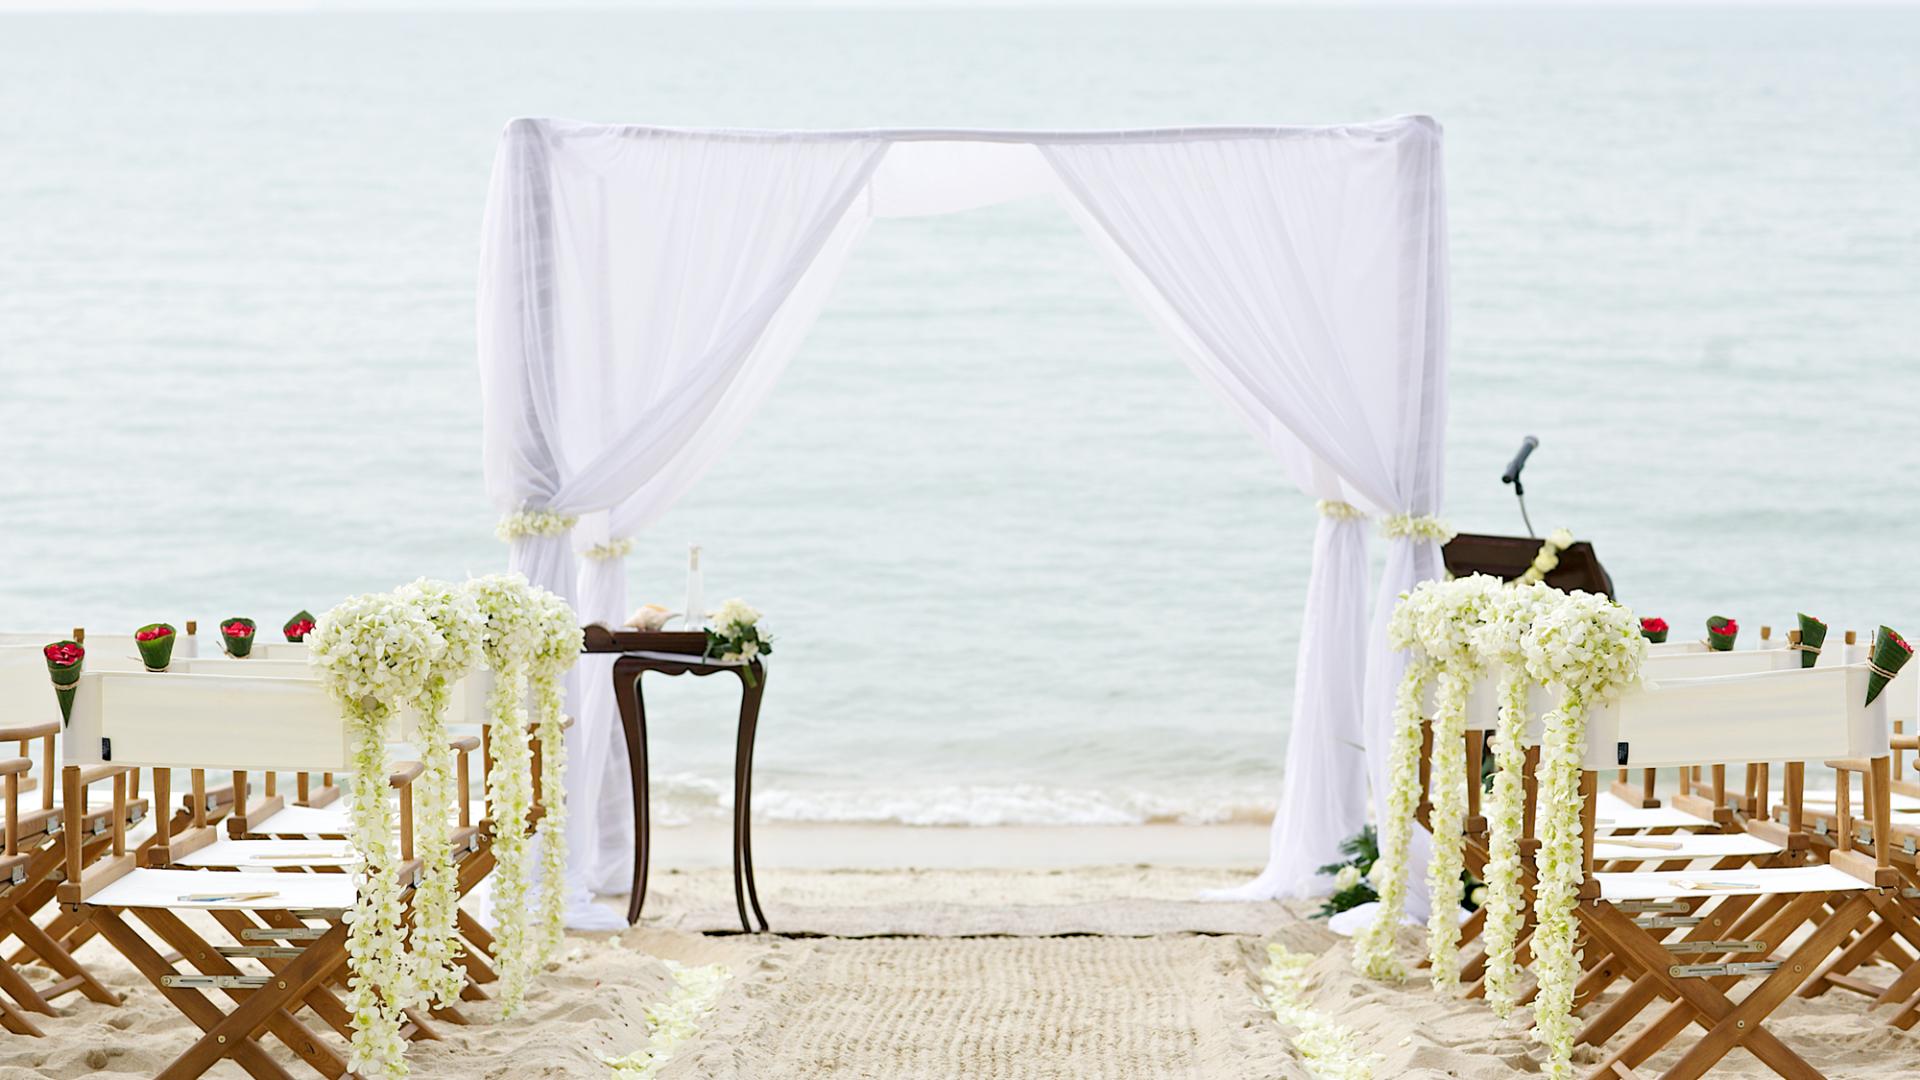 Beach Wedding Venues for Hire in Perth